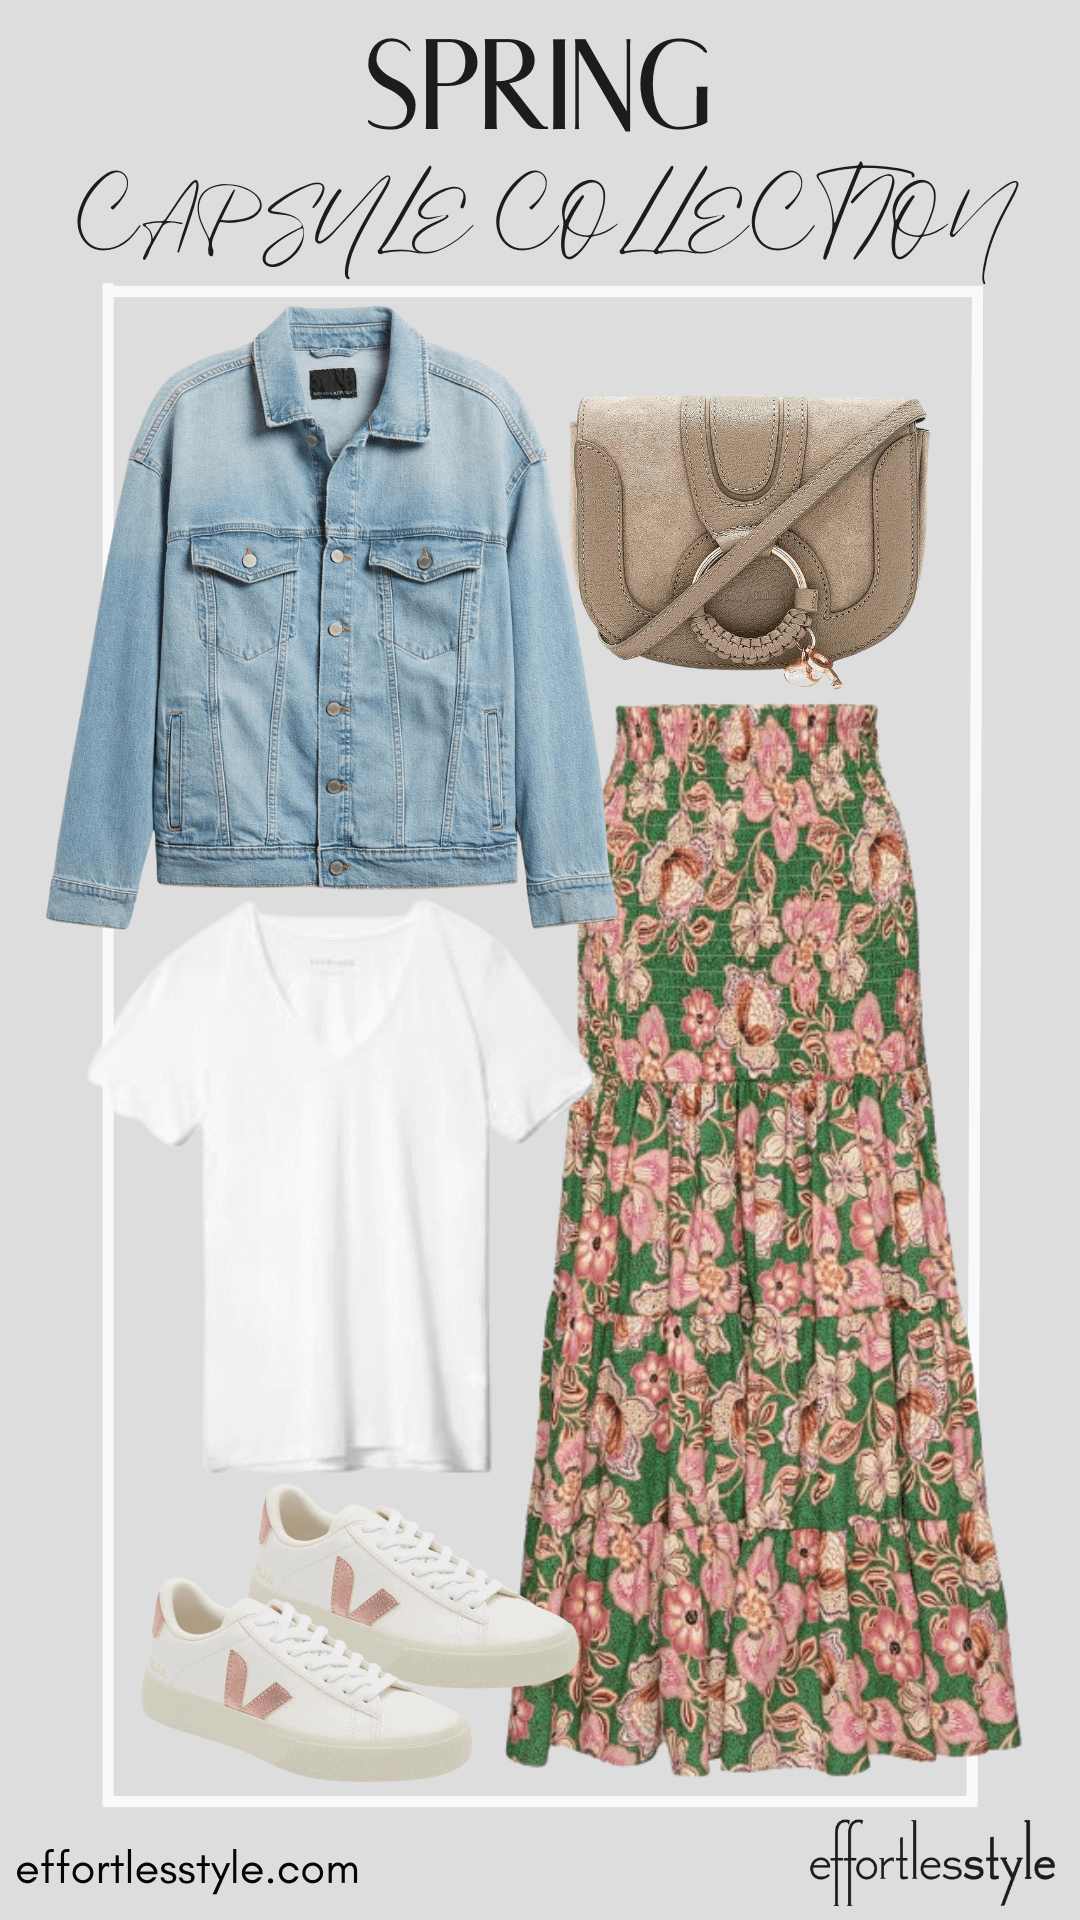 How To Wear Our Spring Capsule Wardrobe - Part 1 Matching Set Skirt & Short Sleeve Tee & Denim Jacket how to style your jean jacket this spring how to wear sneakers with a long skirt how to style a long skirt this spring how to wear a long skirt